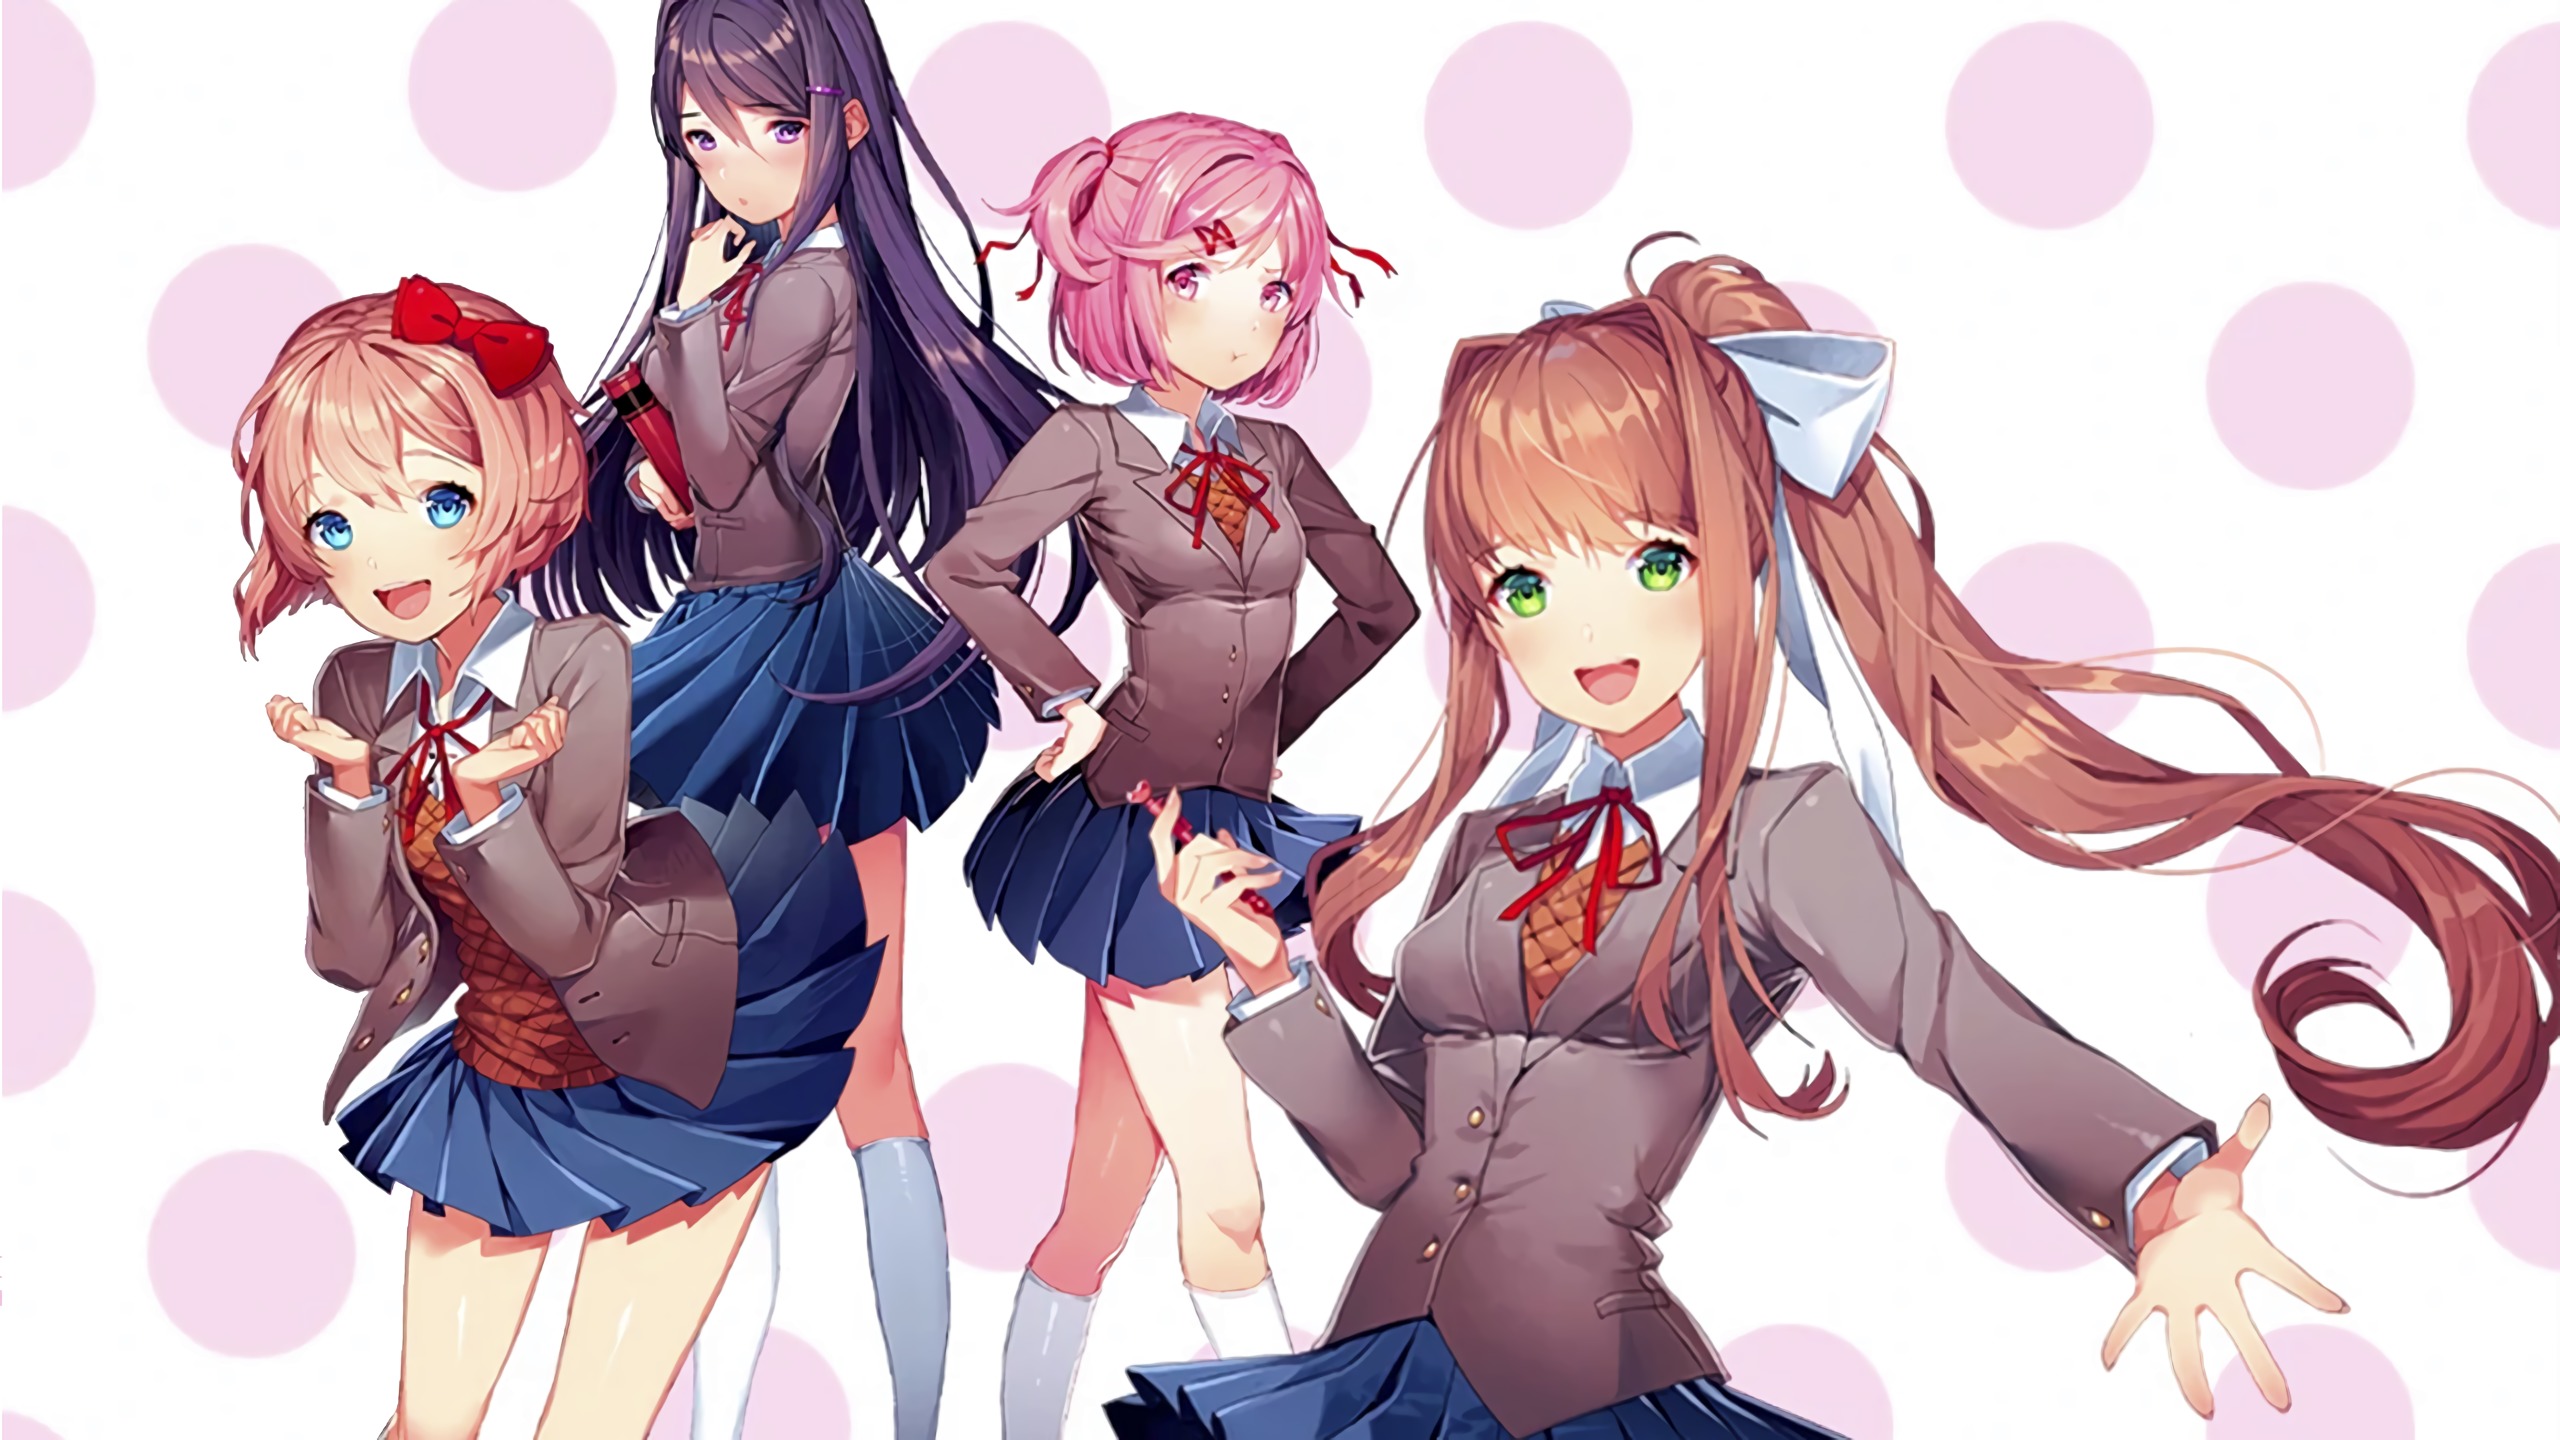 1920x1080 Doki Doki Literature Club! Wallpaper Background Image. View,  download, comment, and rate - Wallpaper Abyss